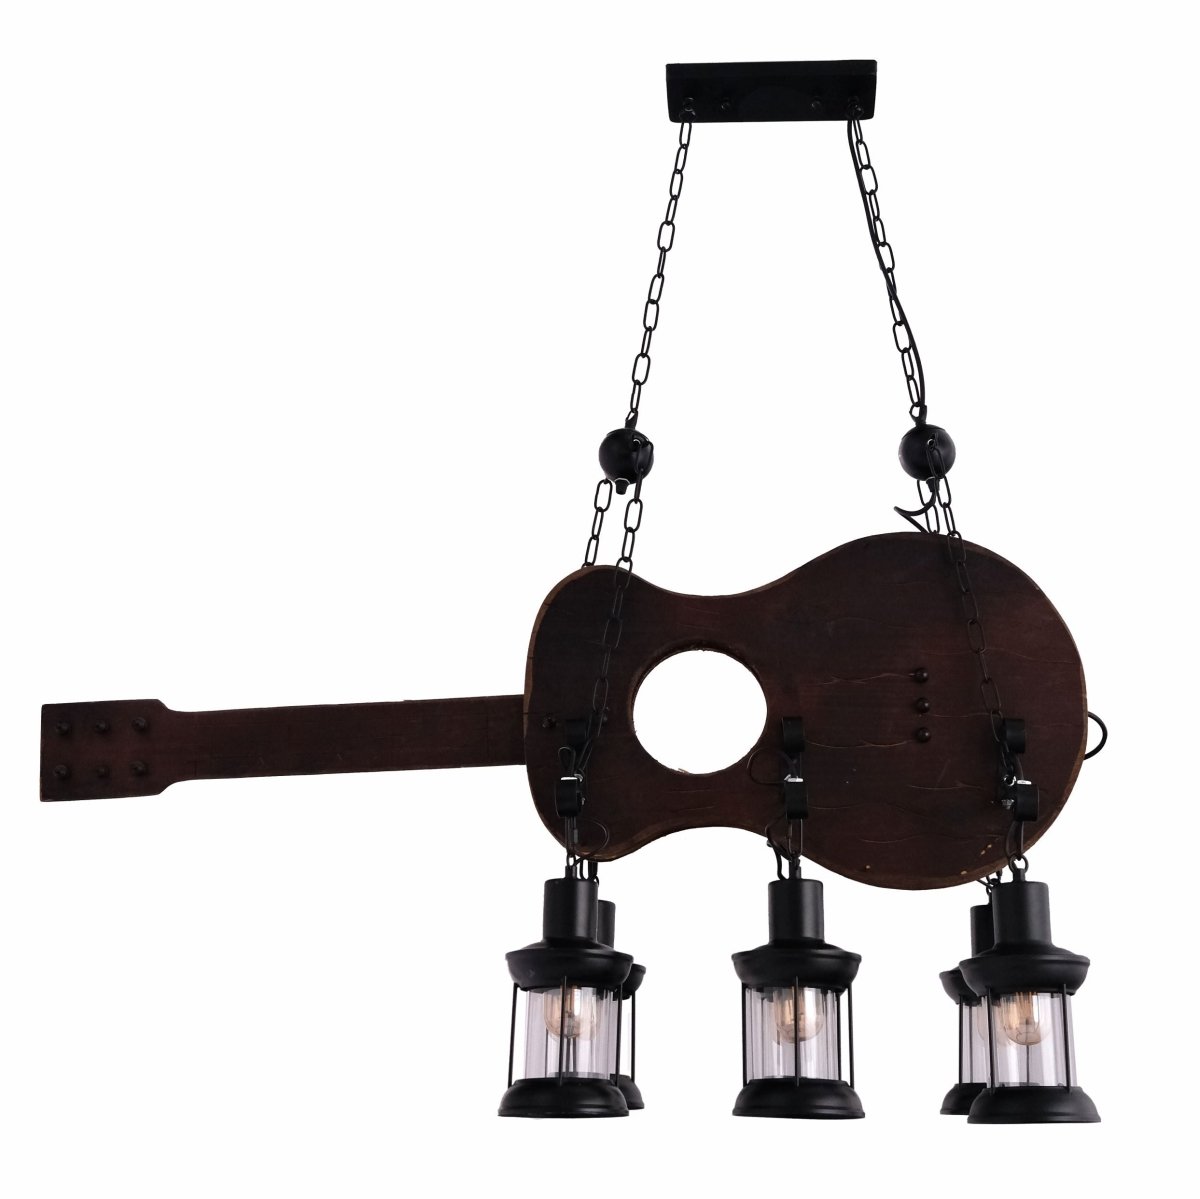 Main image of Old Wood Guitar 6 Lamps island Chandelier with E27 Fitting | TEKLED 158-17872